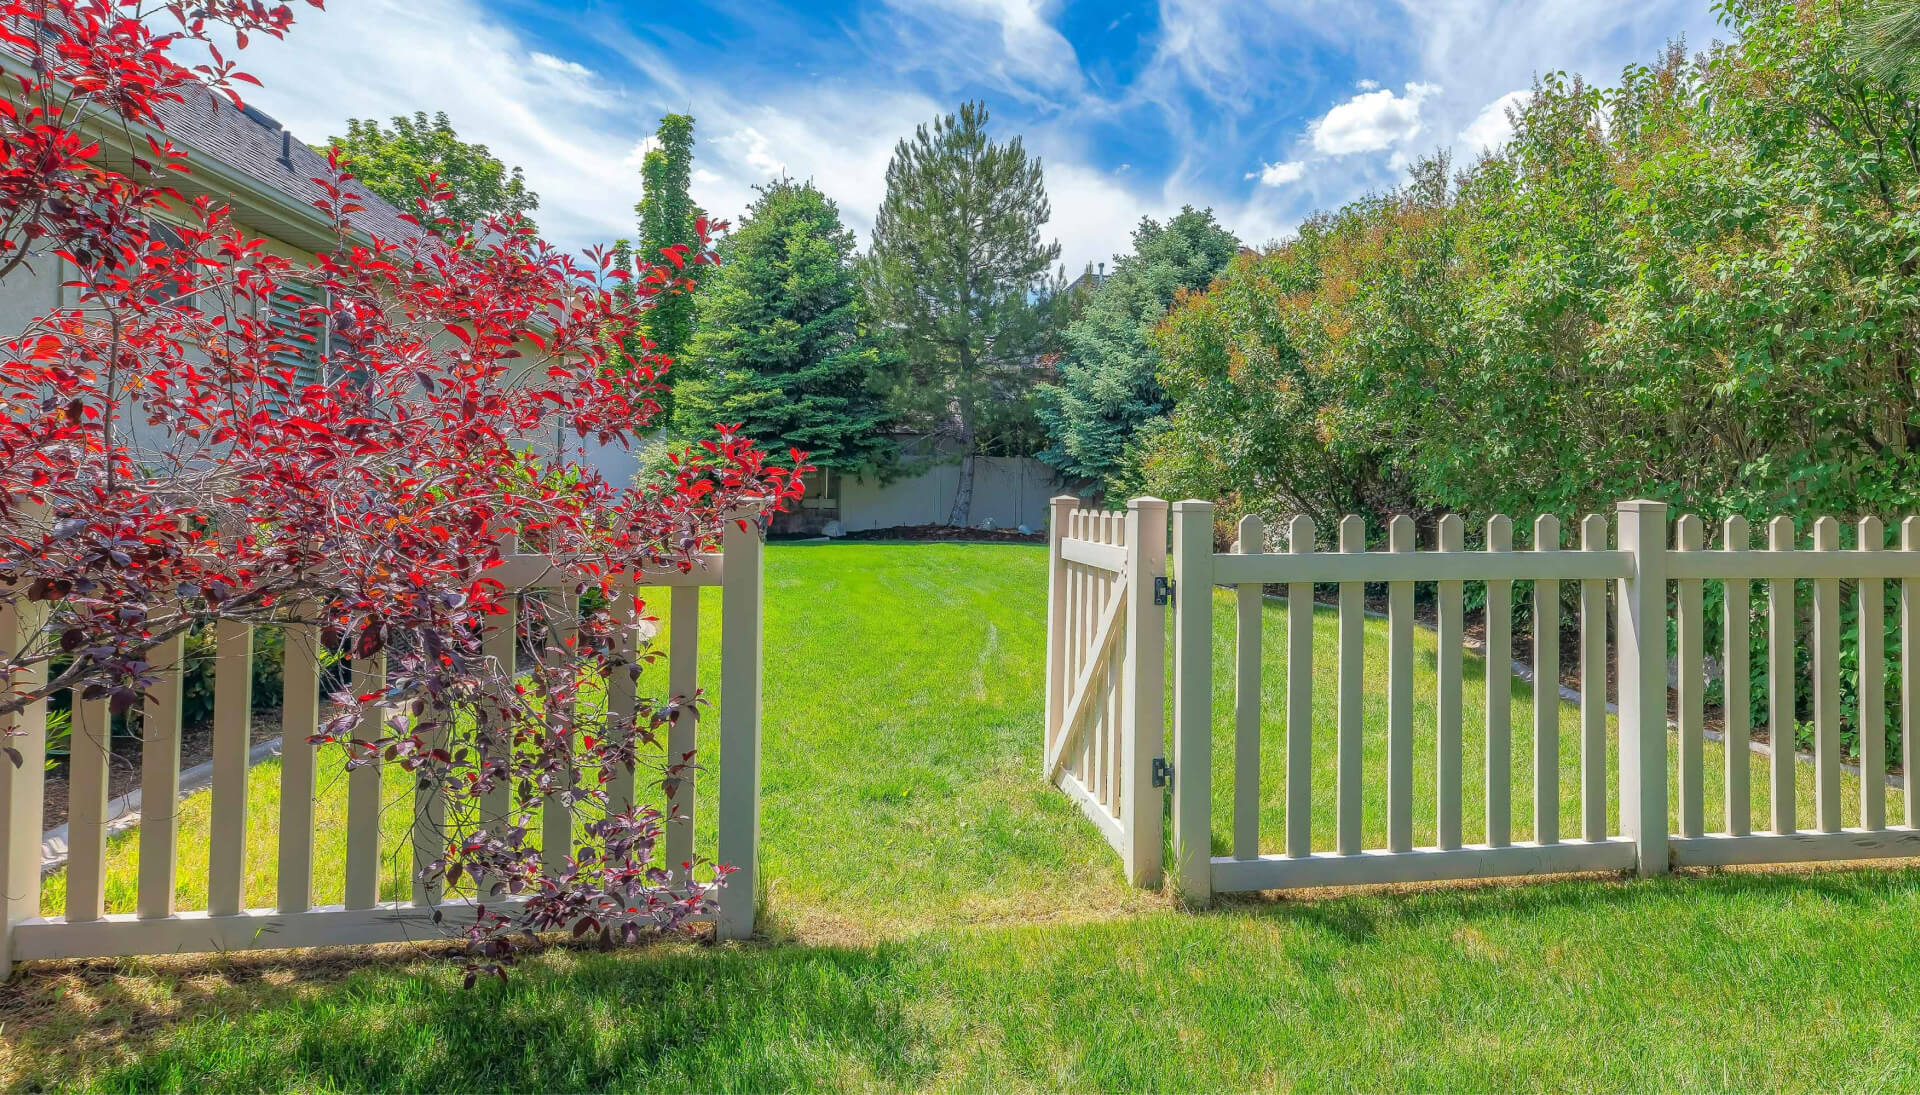 A functional fence gate providing access to a well-maintained backyard, surrounded by a wooden fence in Fresno